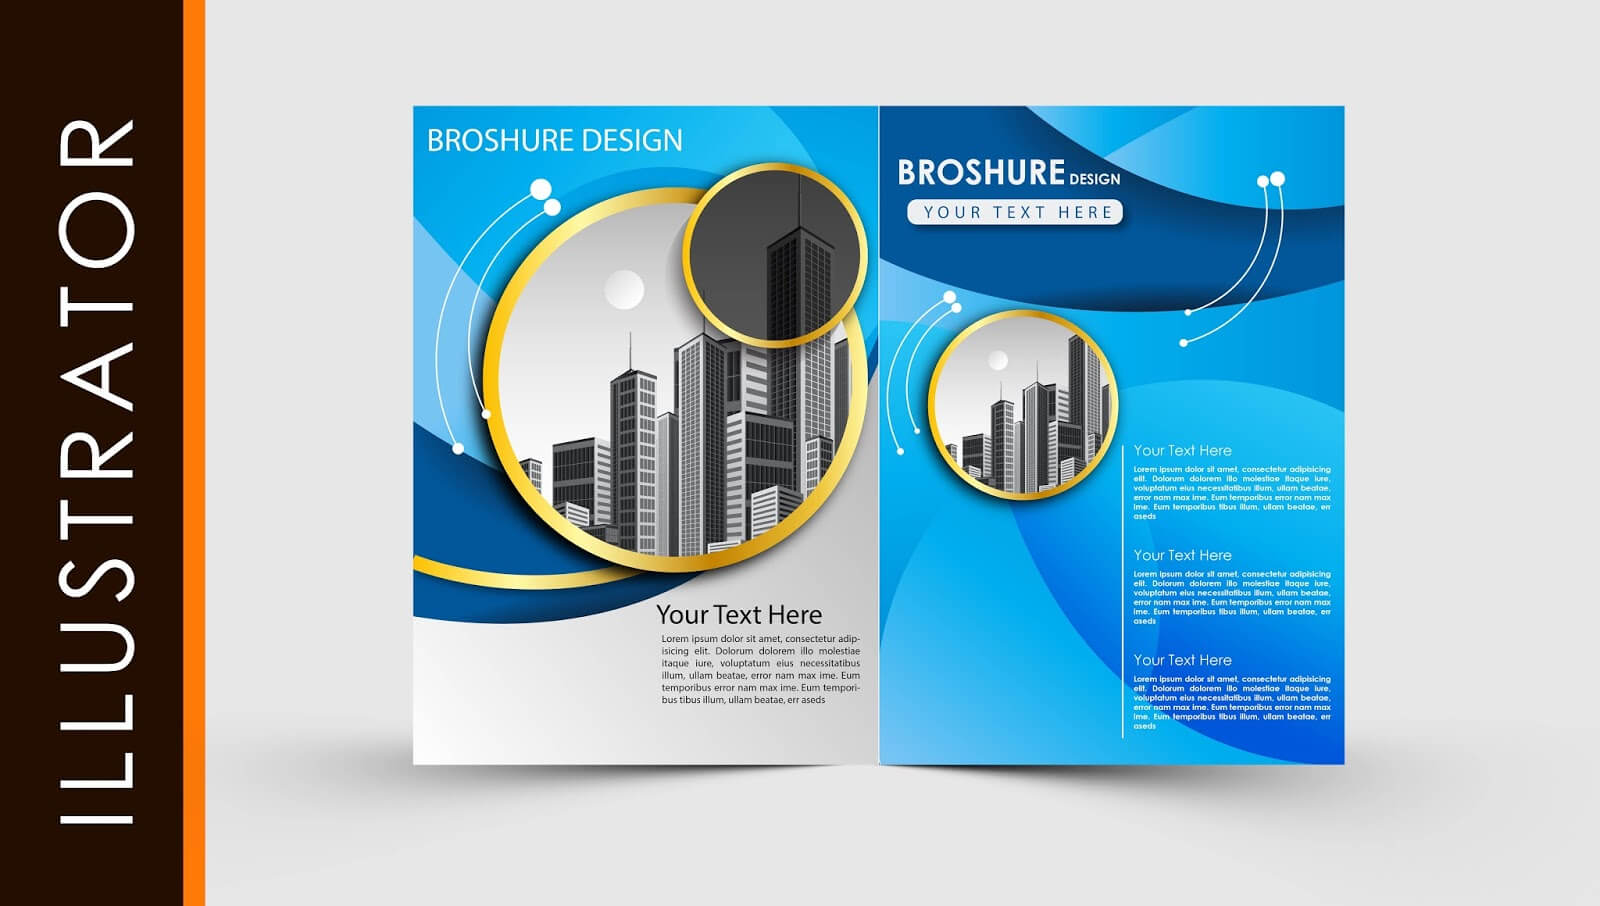 Free Download Adobe Illustrator Template Brochure Two Fold Intended For Free Illustrator Brochure Templates Download